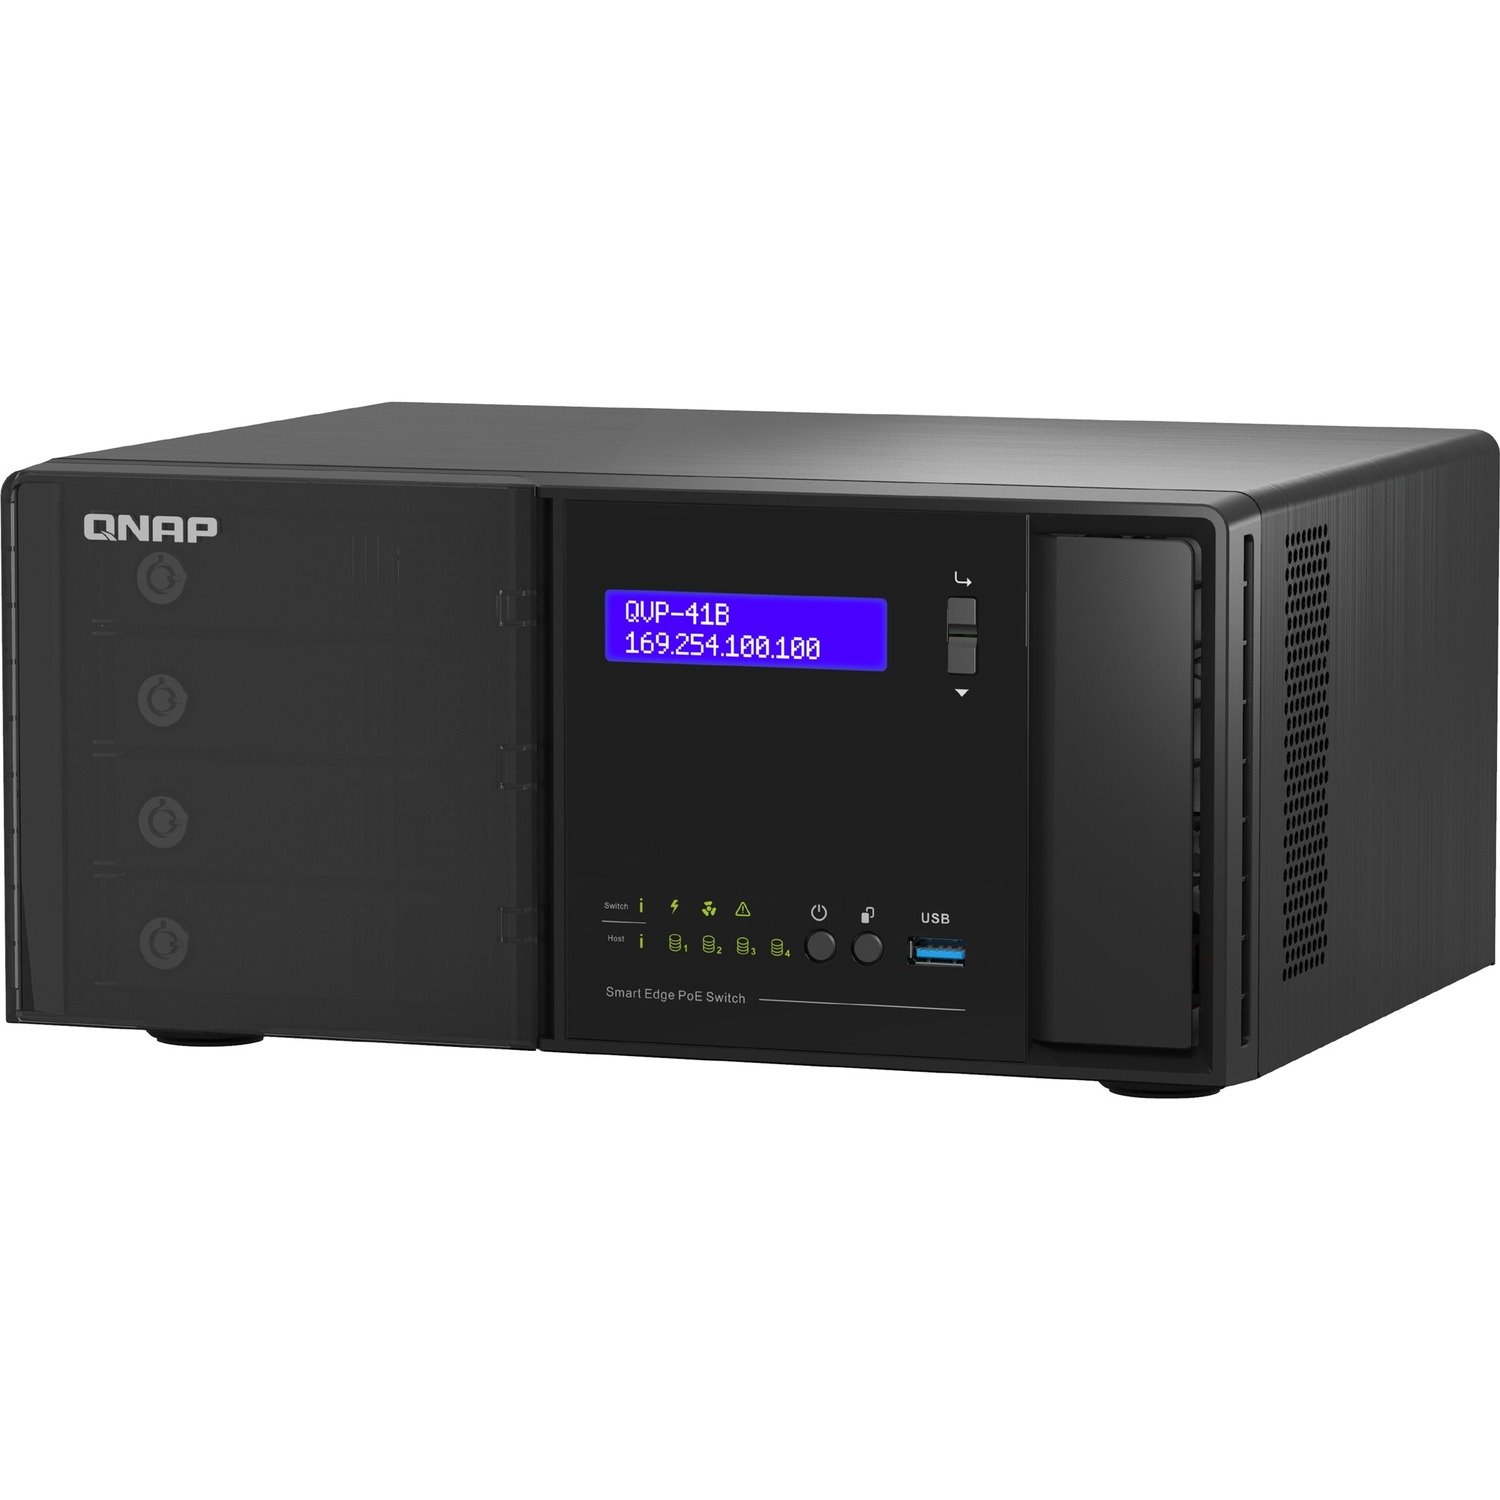 QNAP QVP-41B 24 Channel Wired Video Surveillance Station